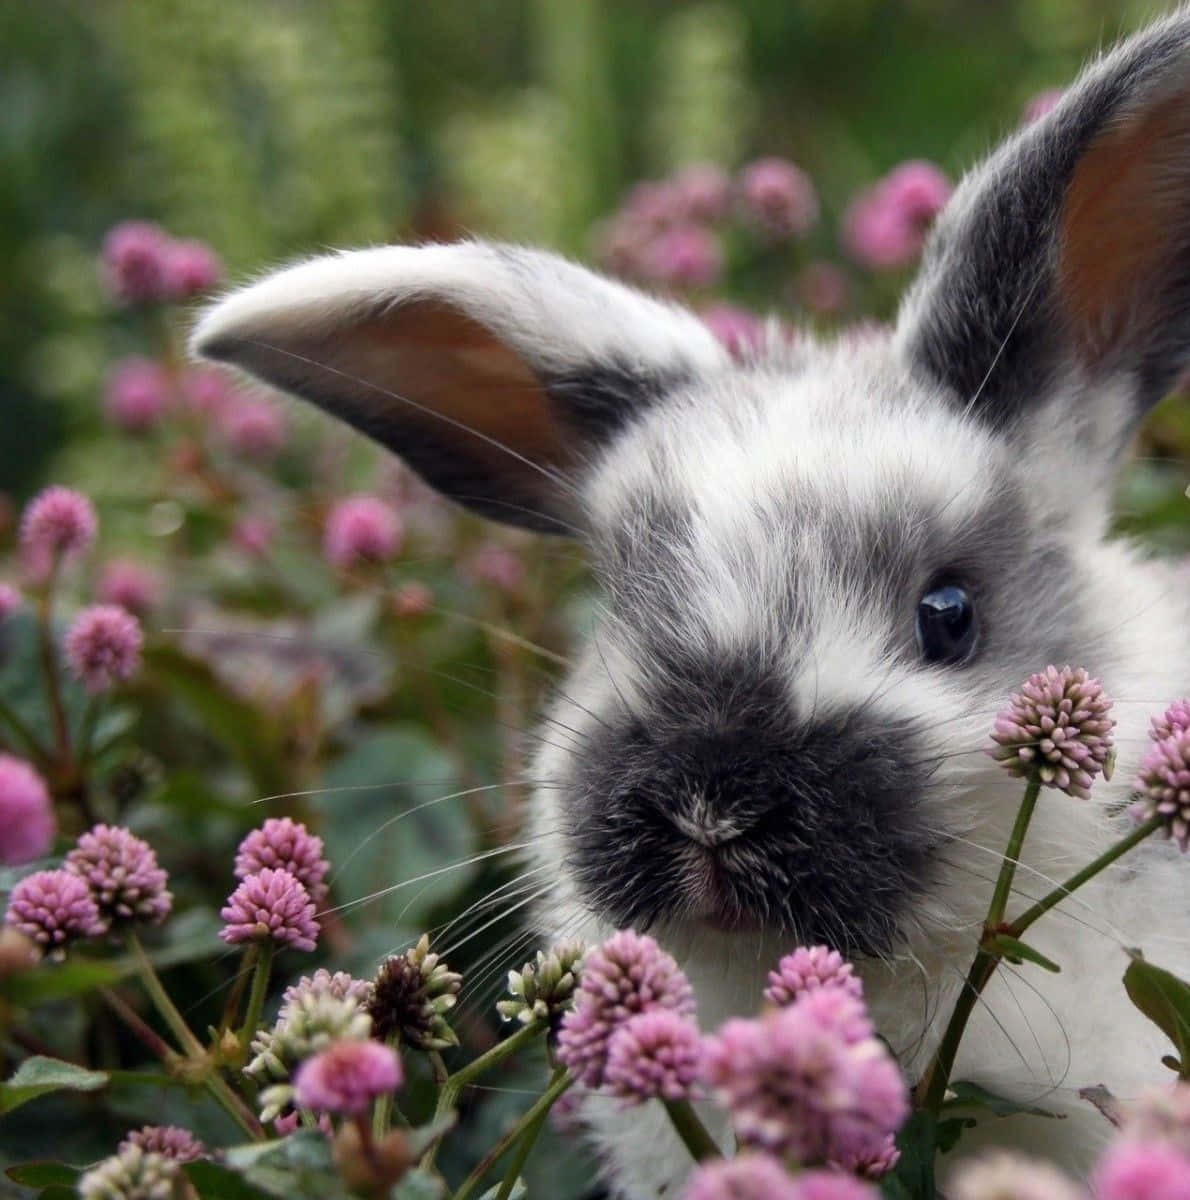 A cute white bunny with pink nose looking at the camera.